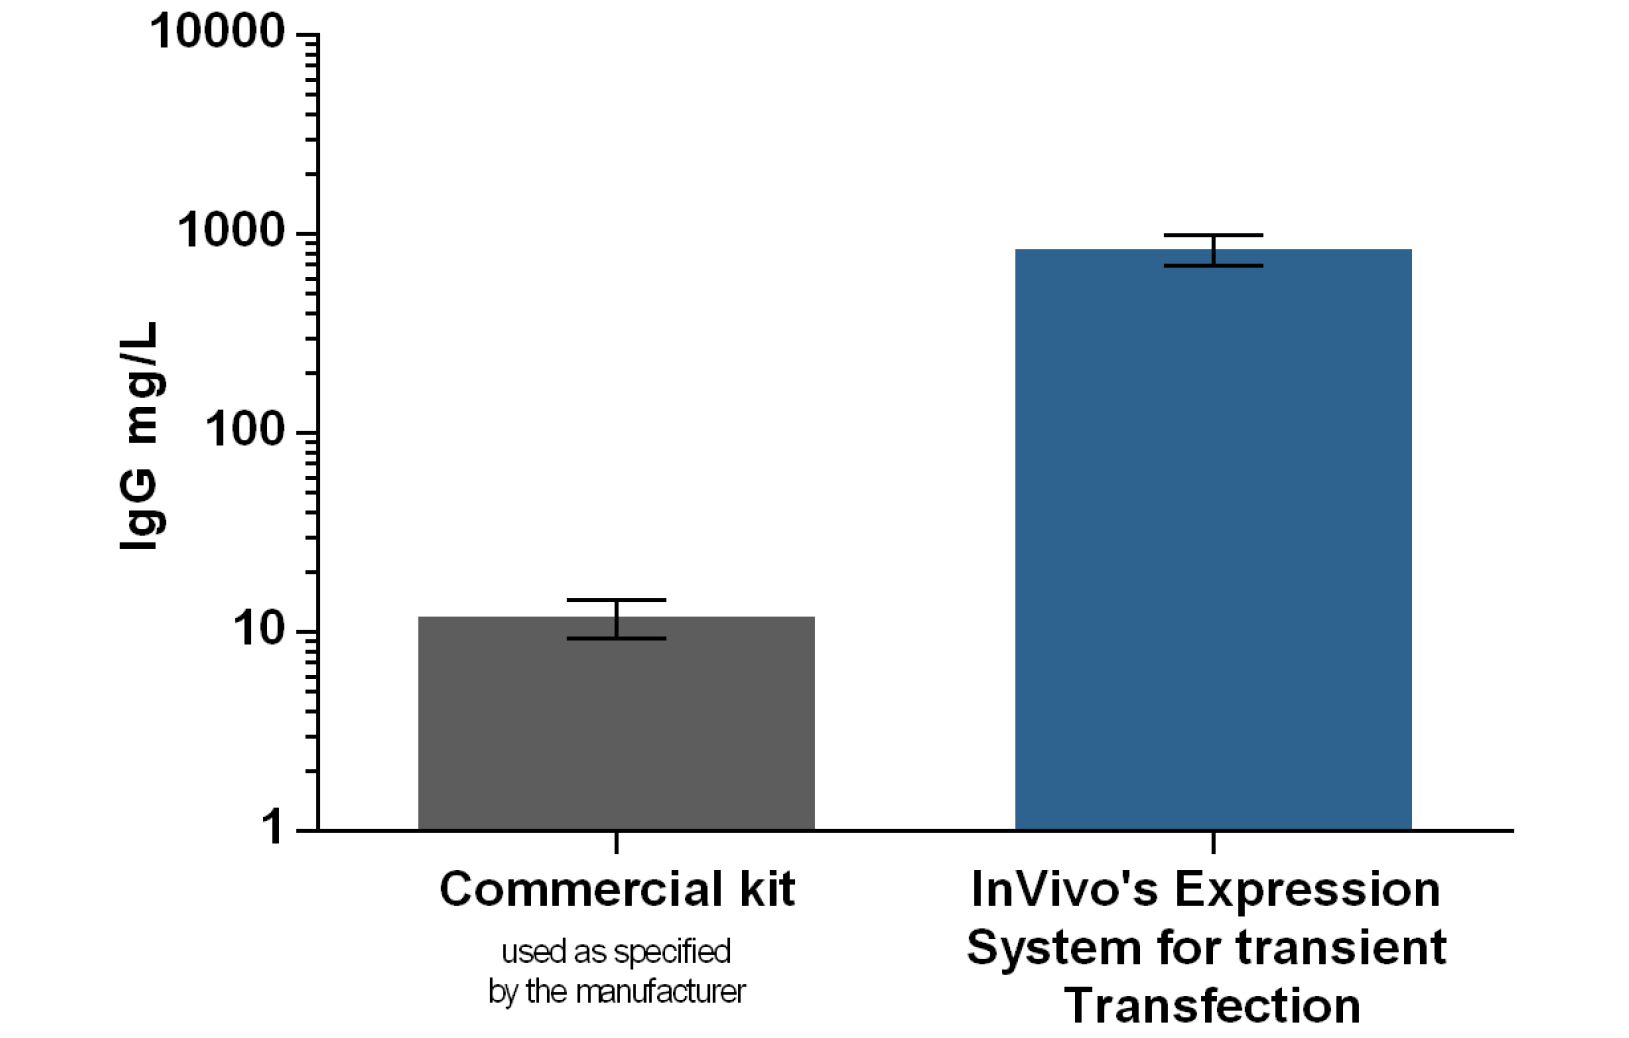 Comparison of Commercial kit and InVivo's Expression System for transient Transfection.